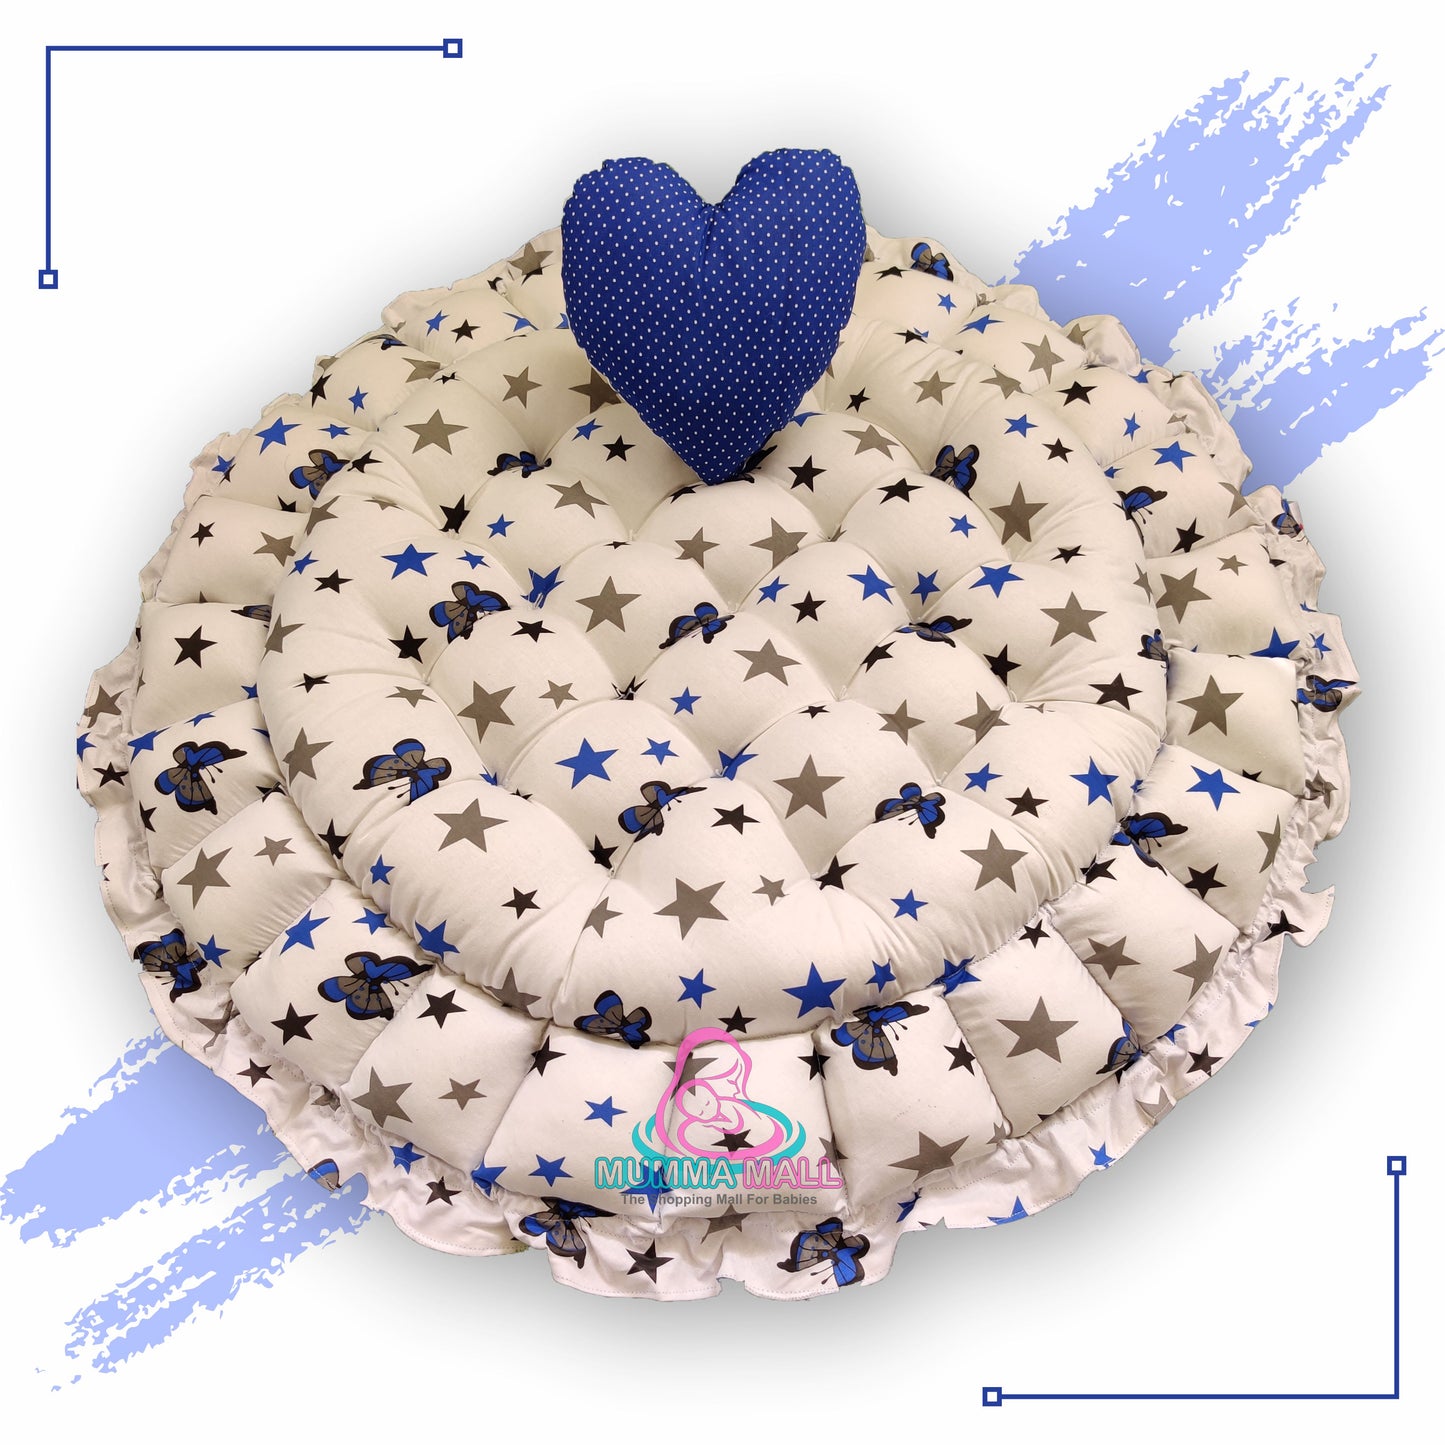 Round baby tub bed with a heart pillow (Blue and White)